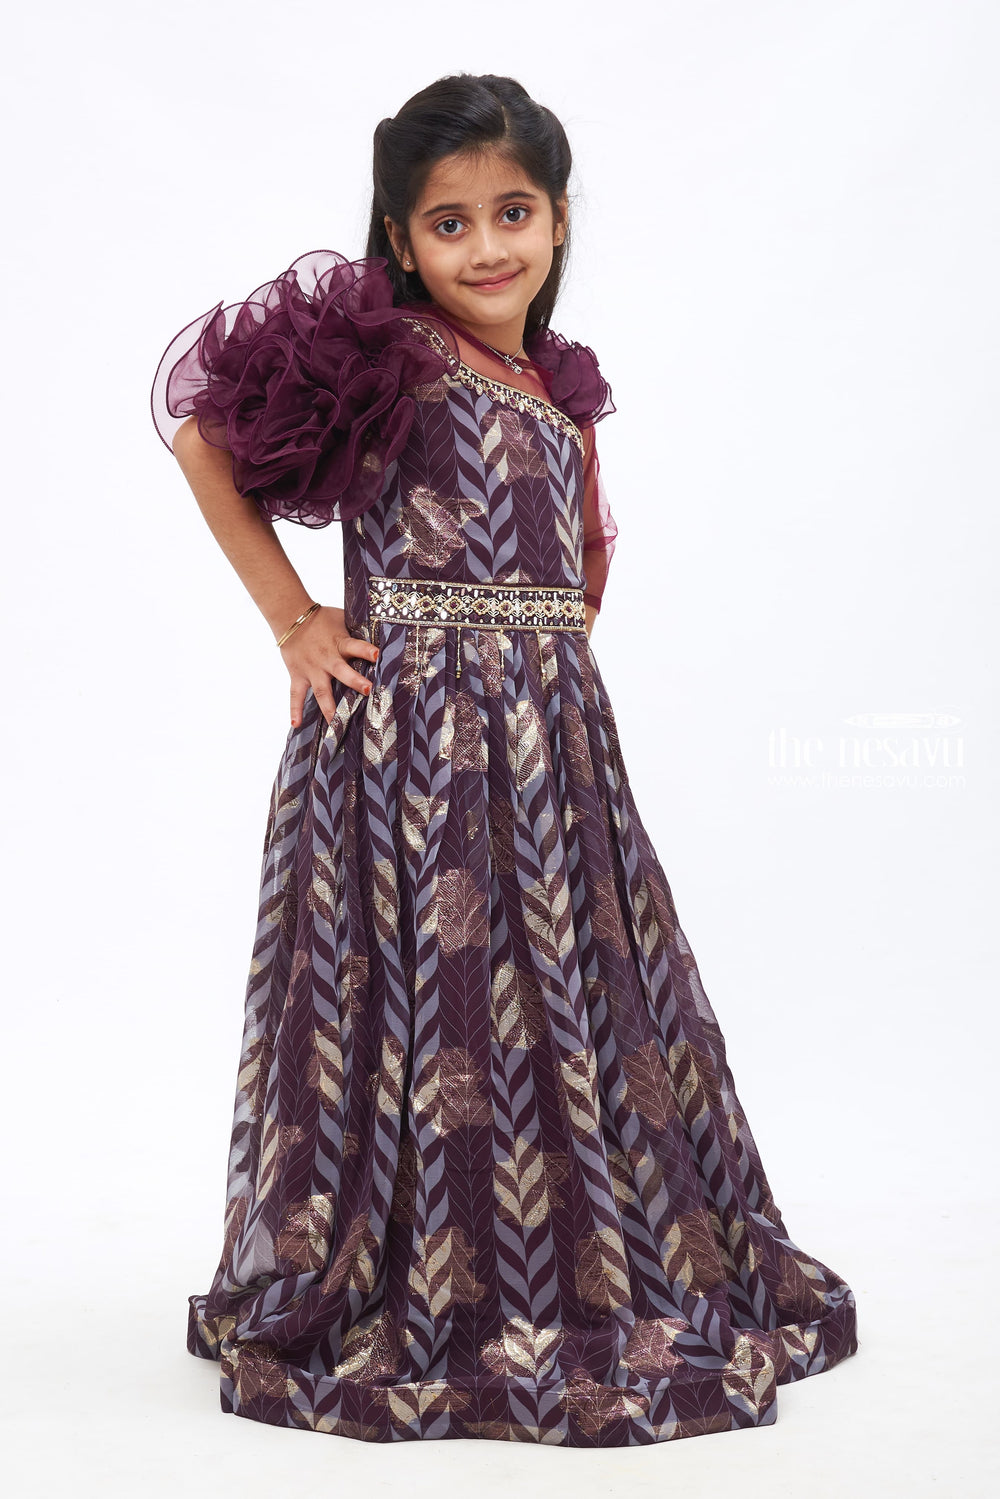 The Nesavu Girls Party Gown Regal Radiance: Mirror Embroidered with Ruffled Purple Party Gown for Girls Nesavu Deep Purple Gown with Mirror Embroidery | Luxurious Party Ensemble for Girls | The Nesavu